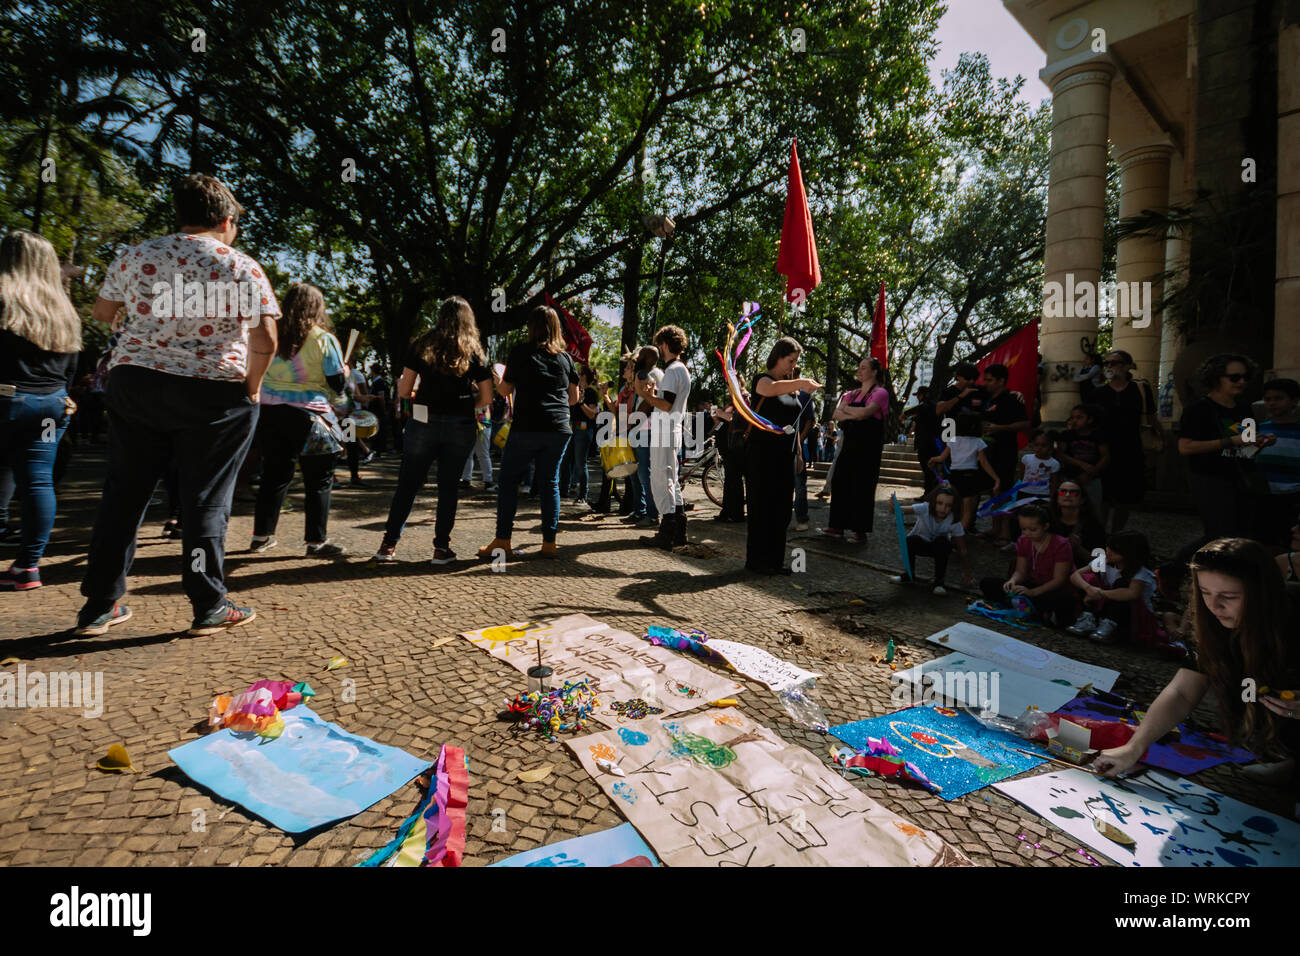 Children making banners for a march, in a pro environment protest during the brazilian independence day Stock Photo